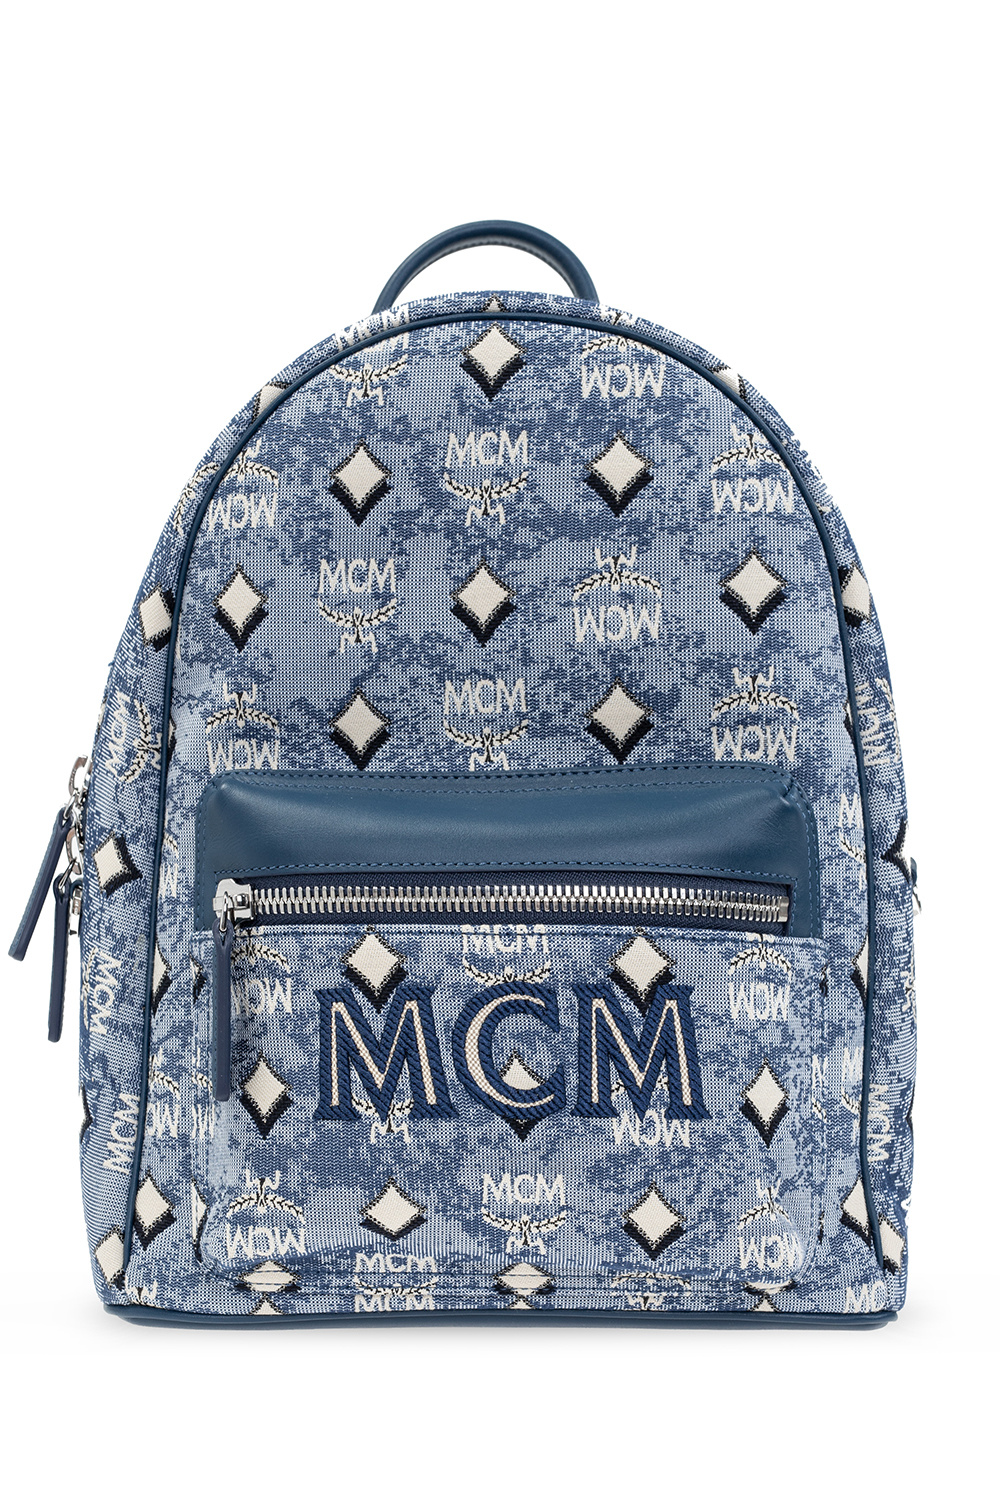 MCM, Bags, Mcm Blue Backpack Never Used